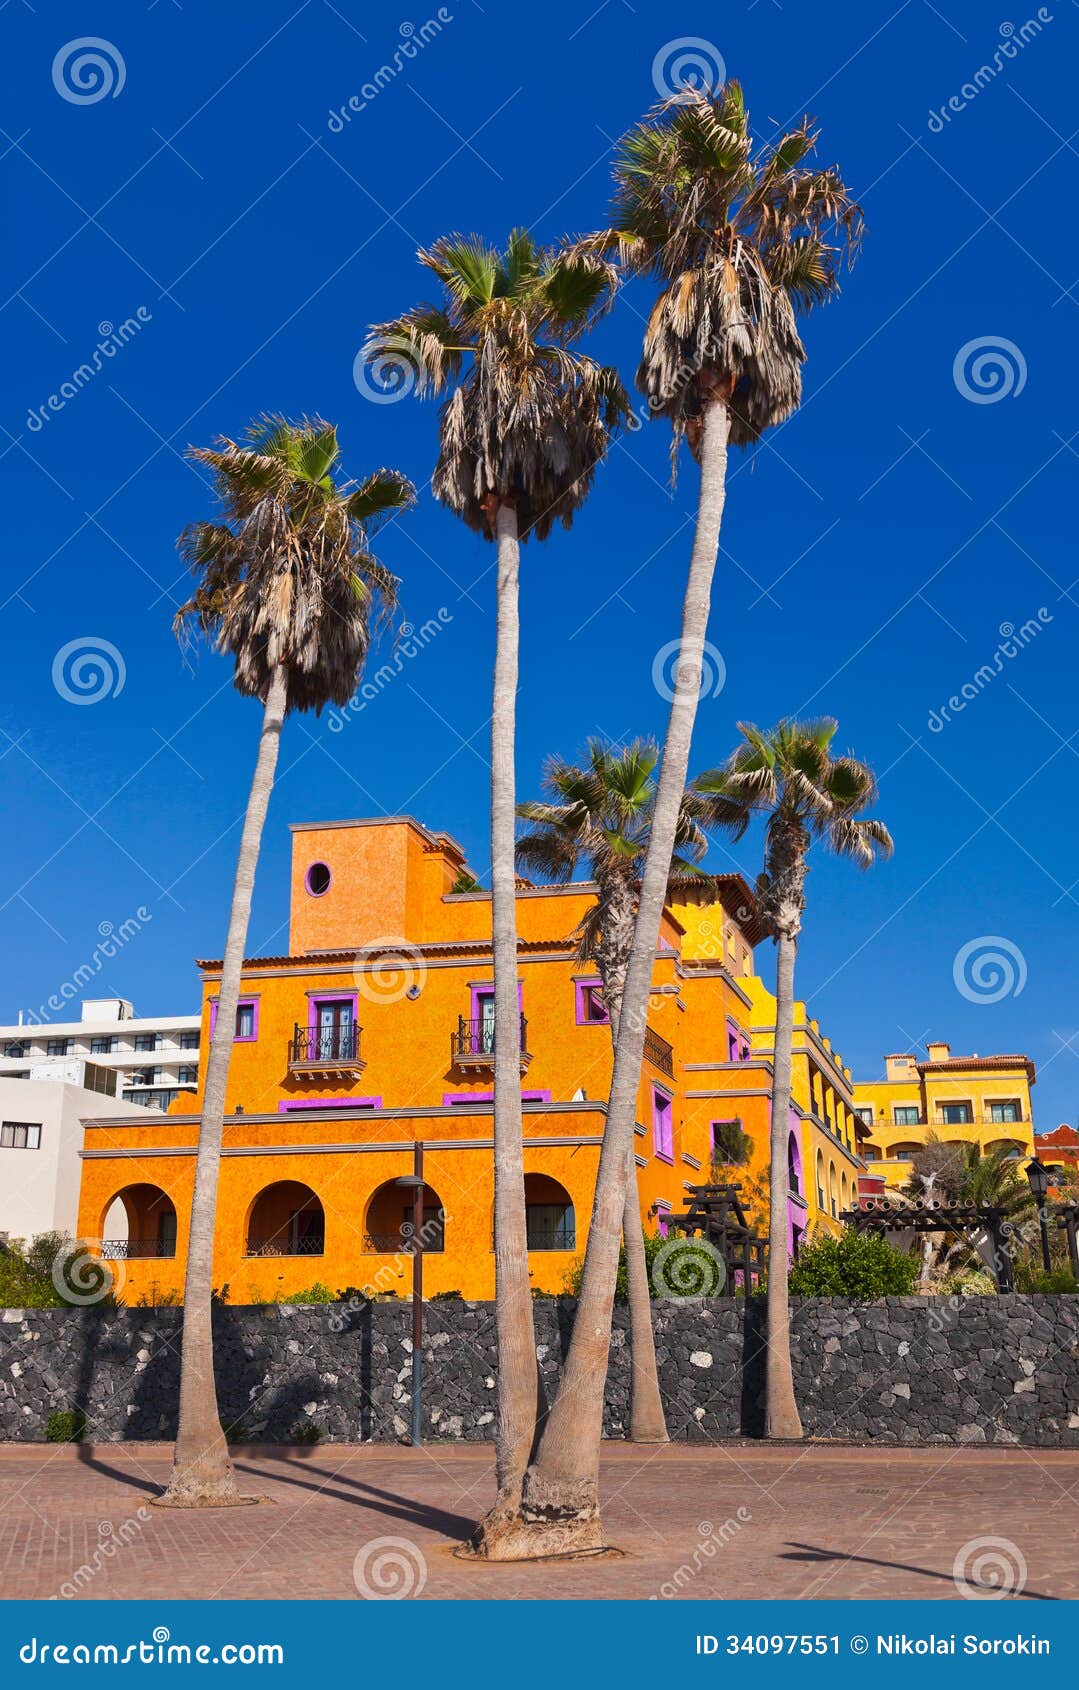 architecture at tenerife island - canaries